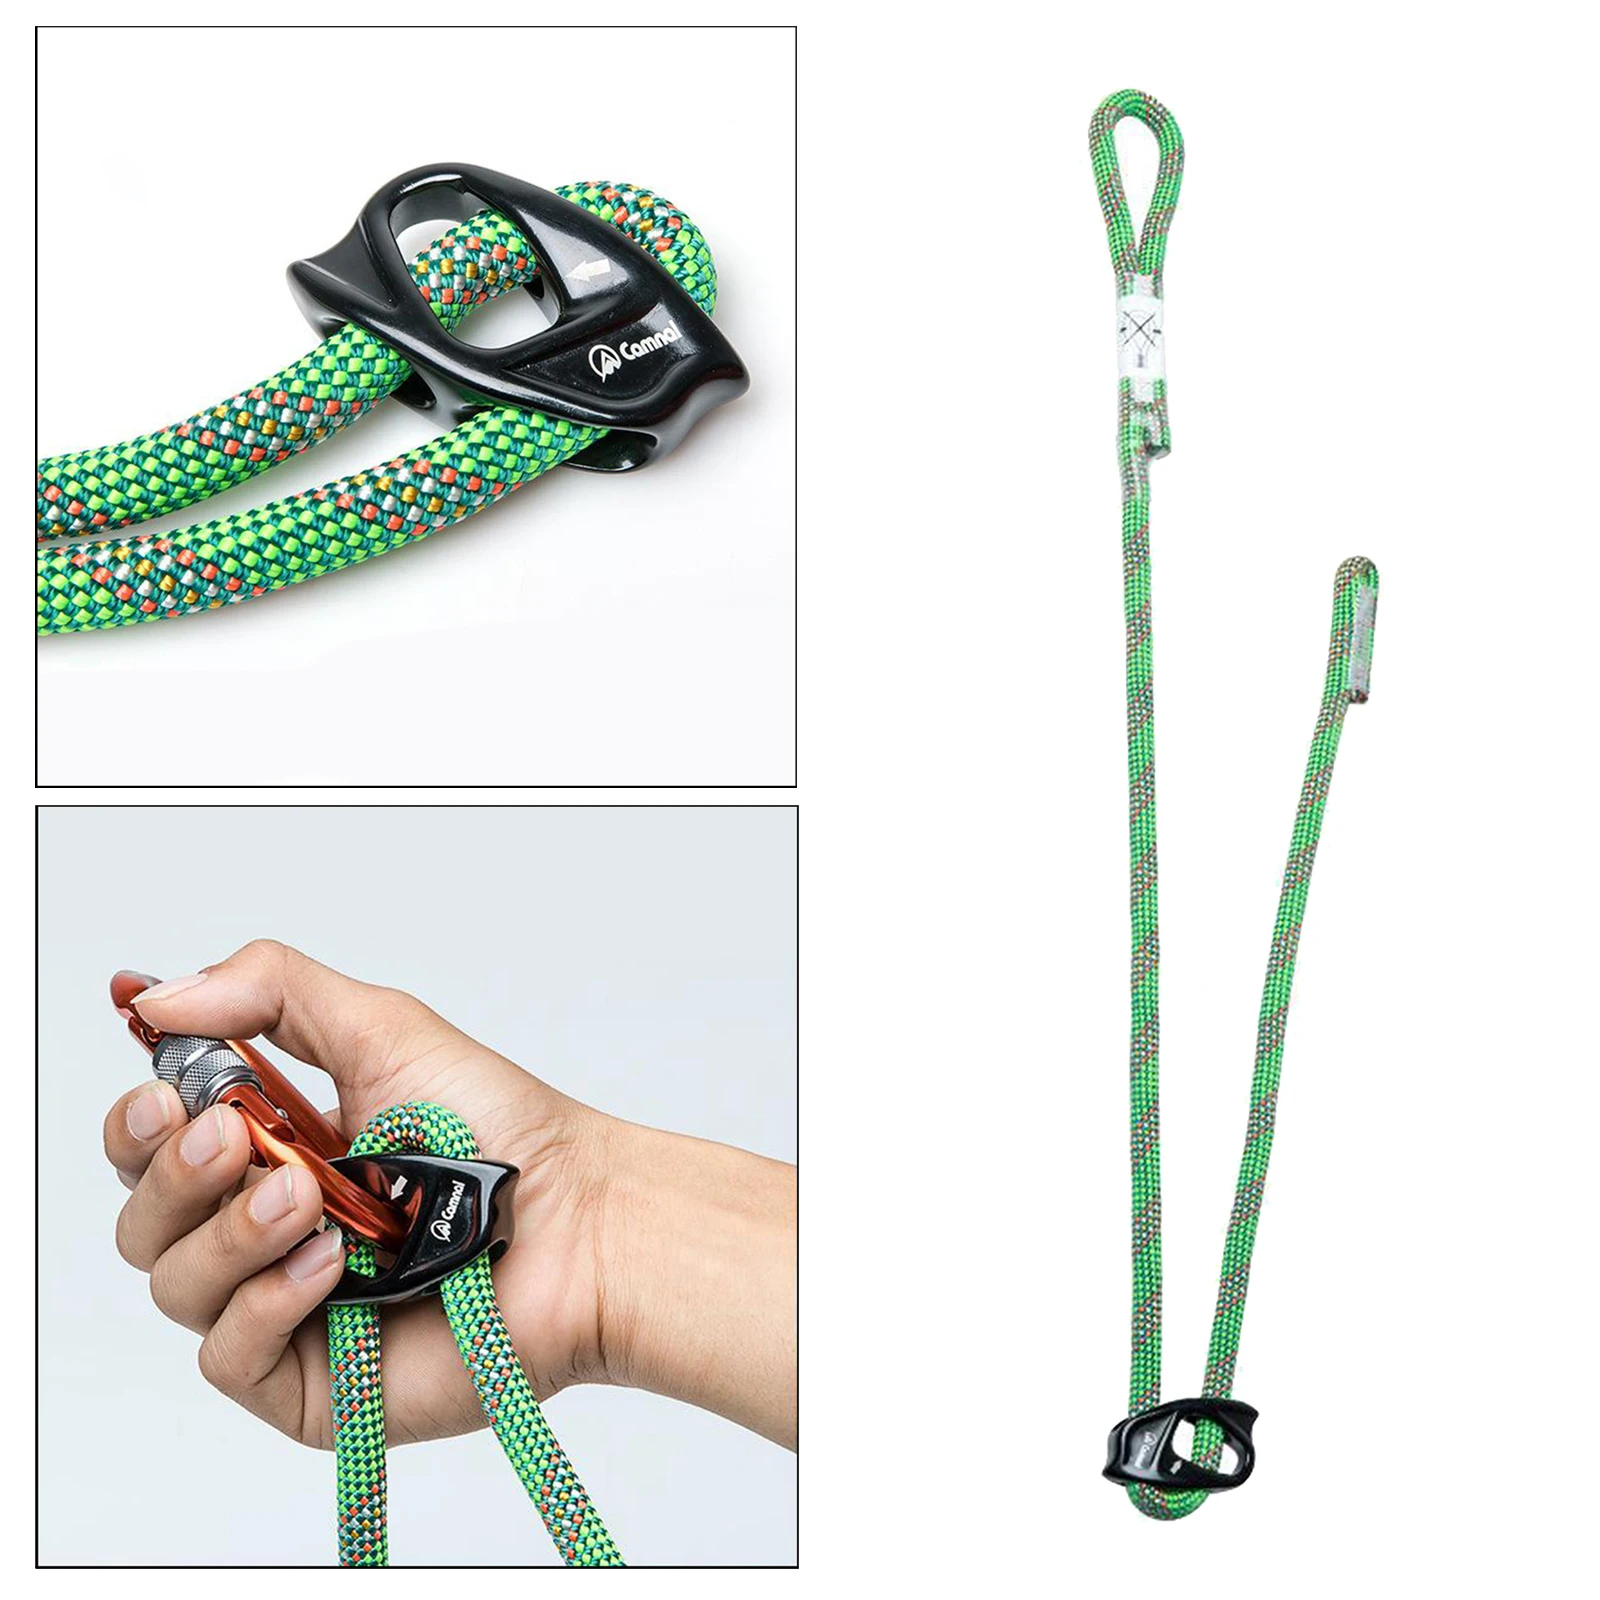 Positioning Lanyard Personal Protection Equipment Work Safety